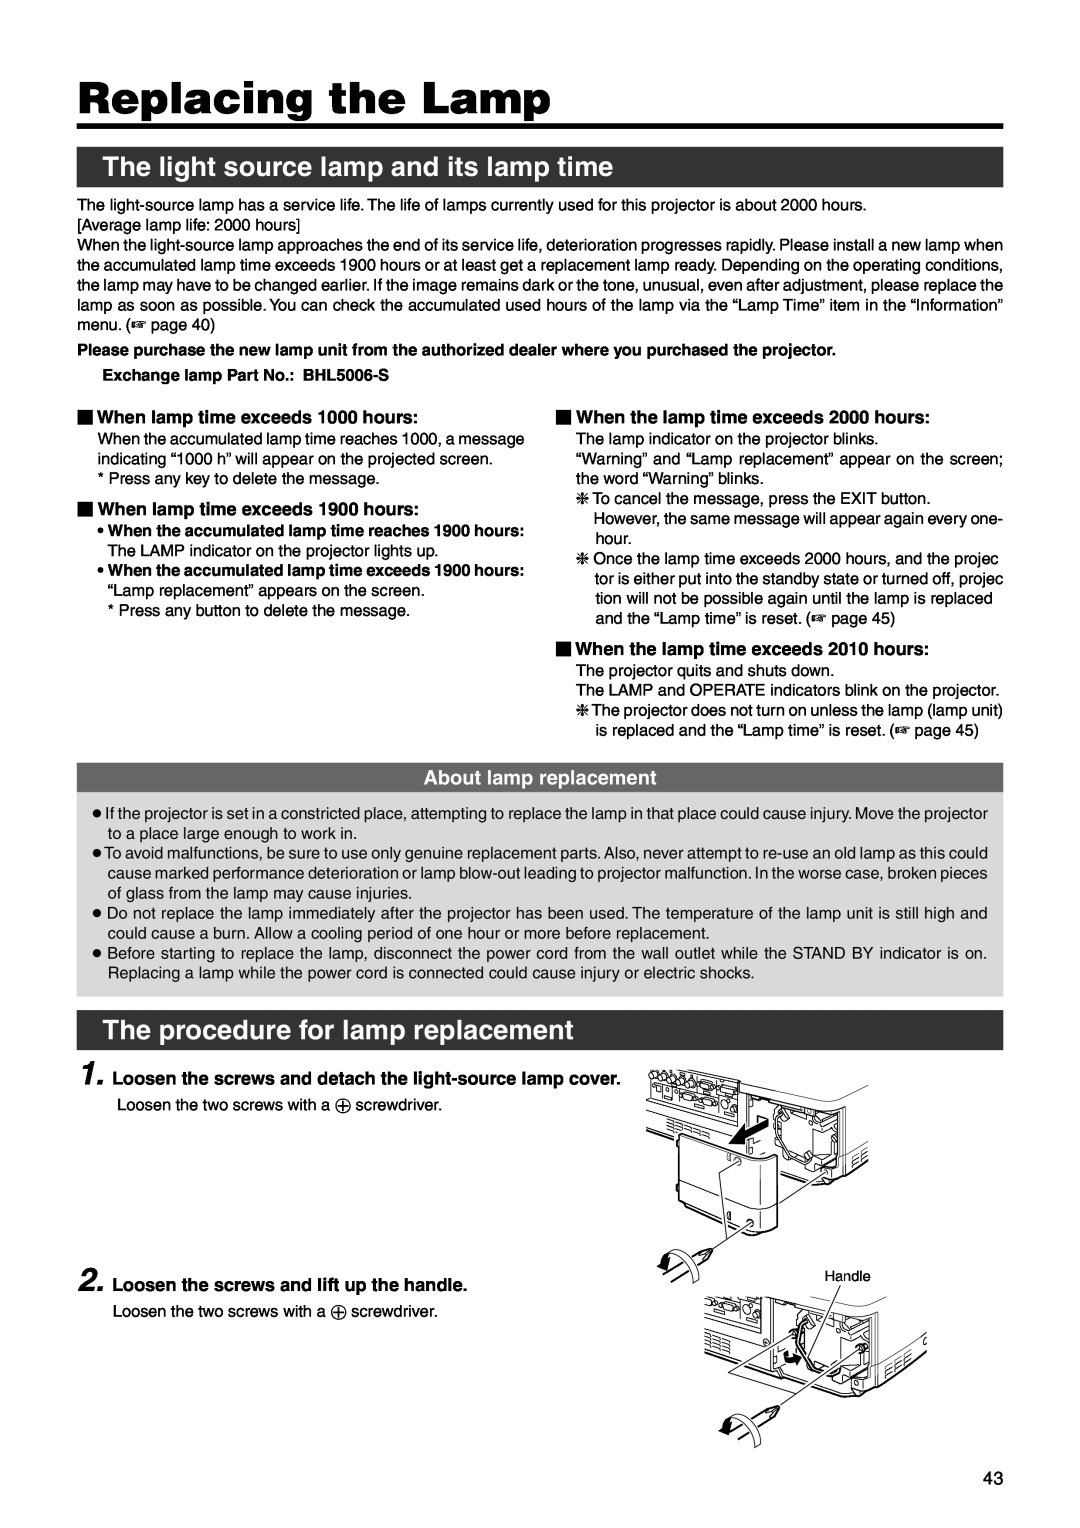 Dukane 28A9017 user manual Replacing the Lamp, The light source lamp and its lamp time, The procedure for lamp replacement 